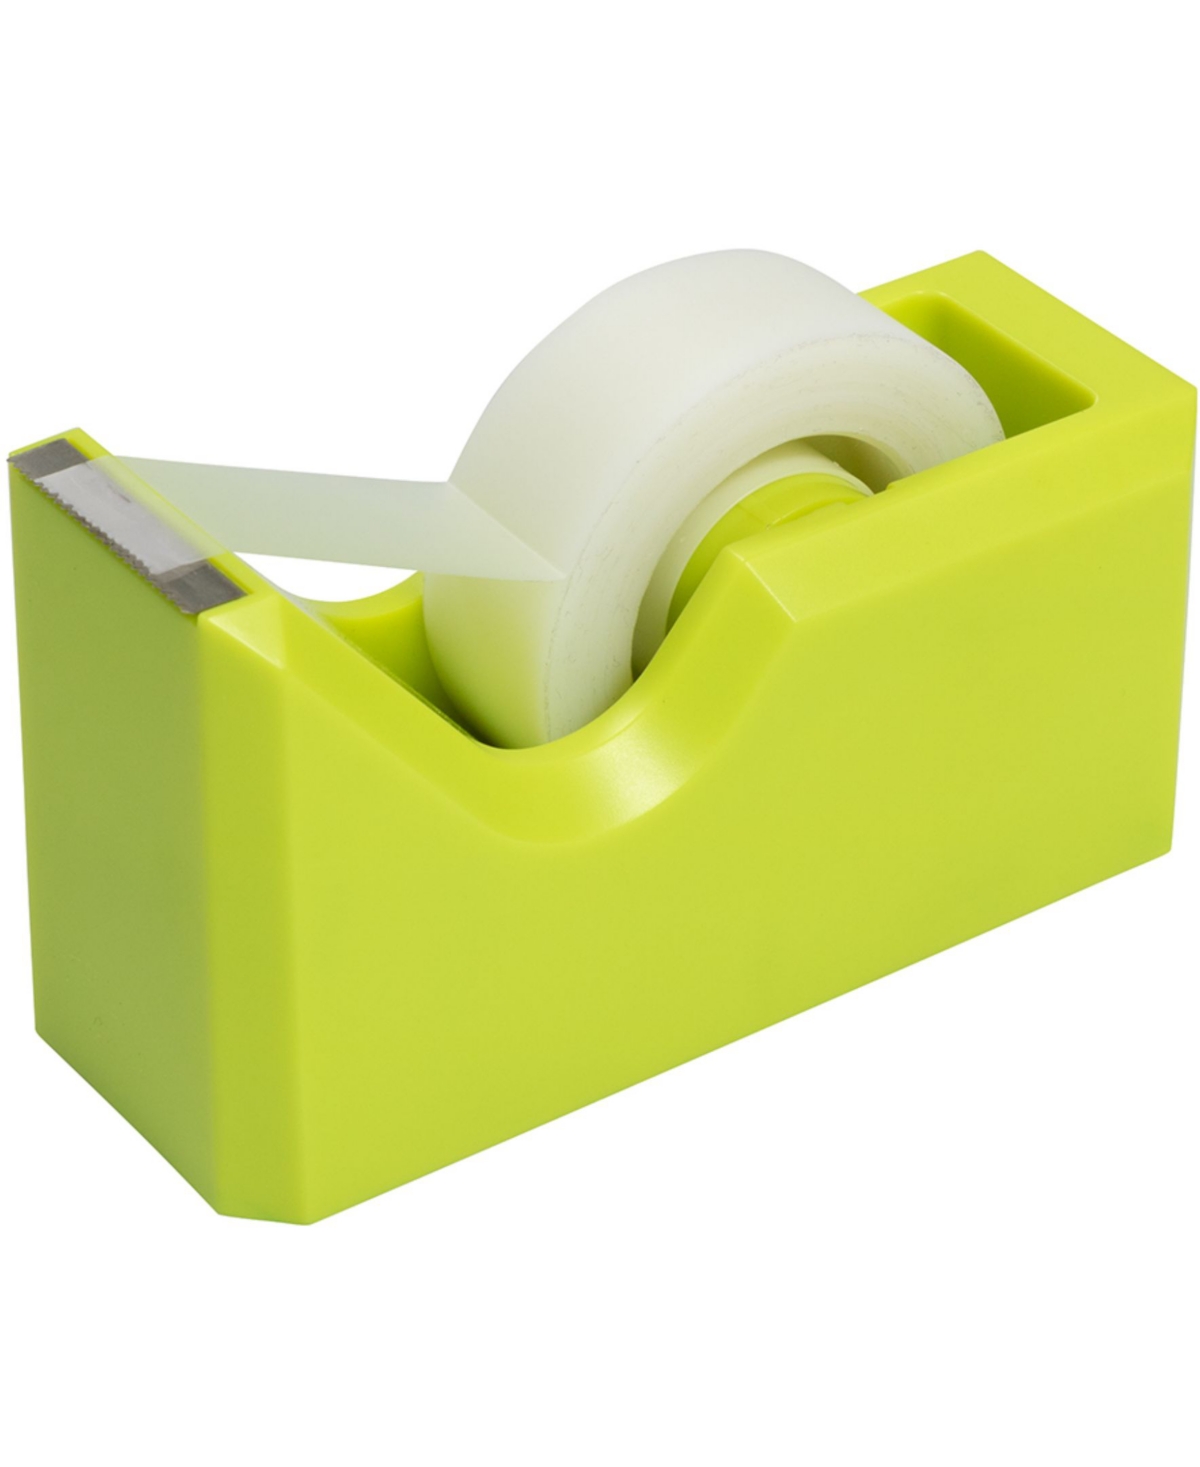 Colorful Desk Tape Dispensers - Sold Individually - Lime Green